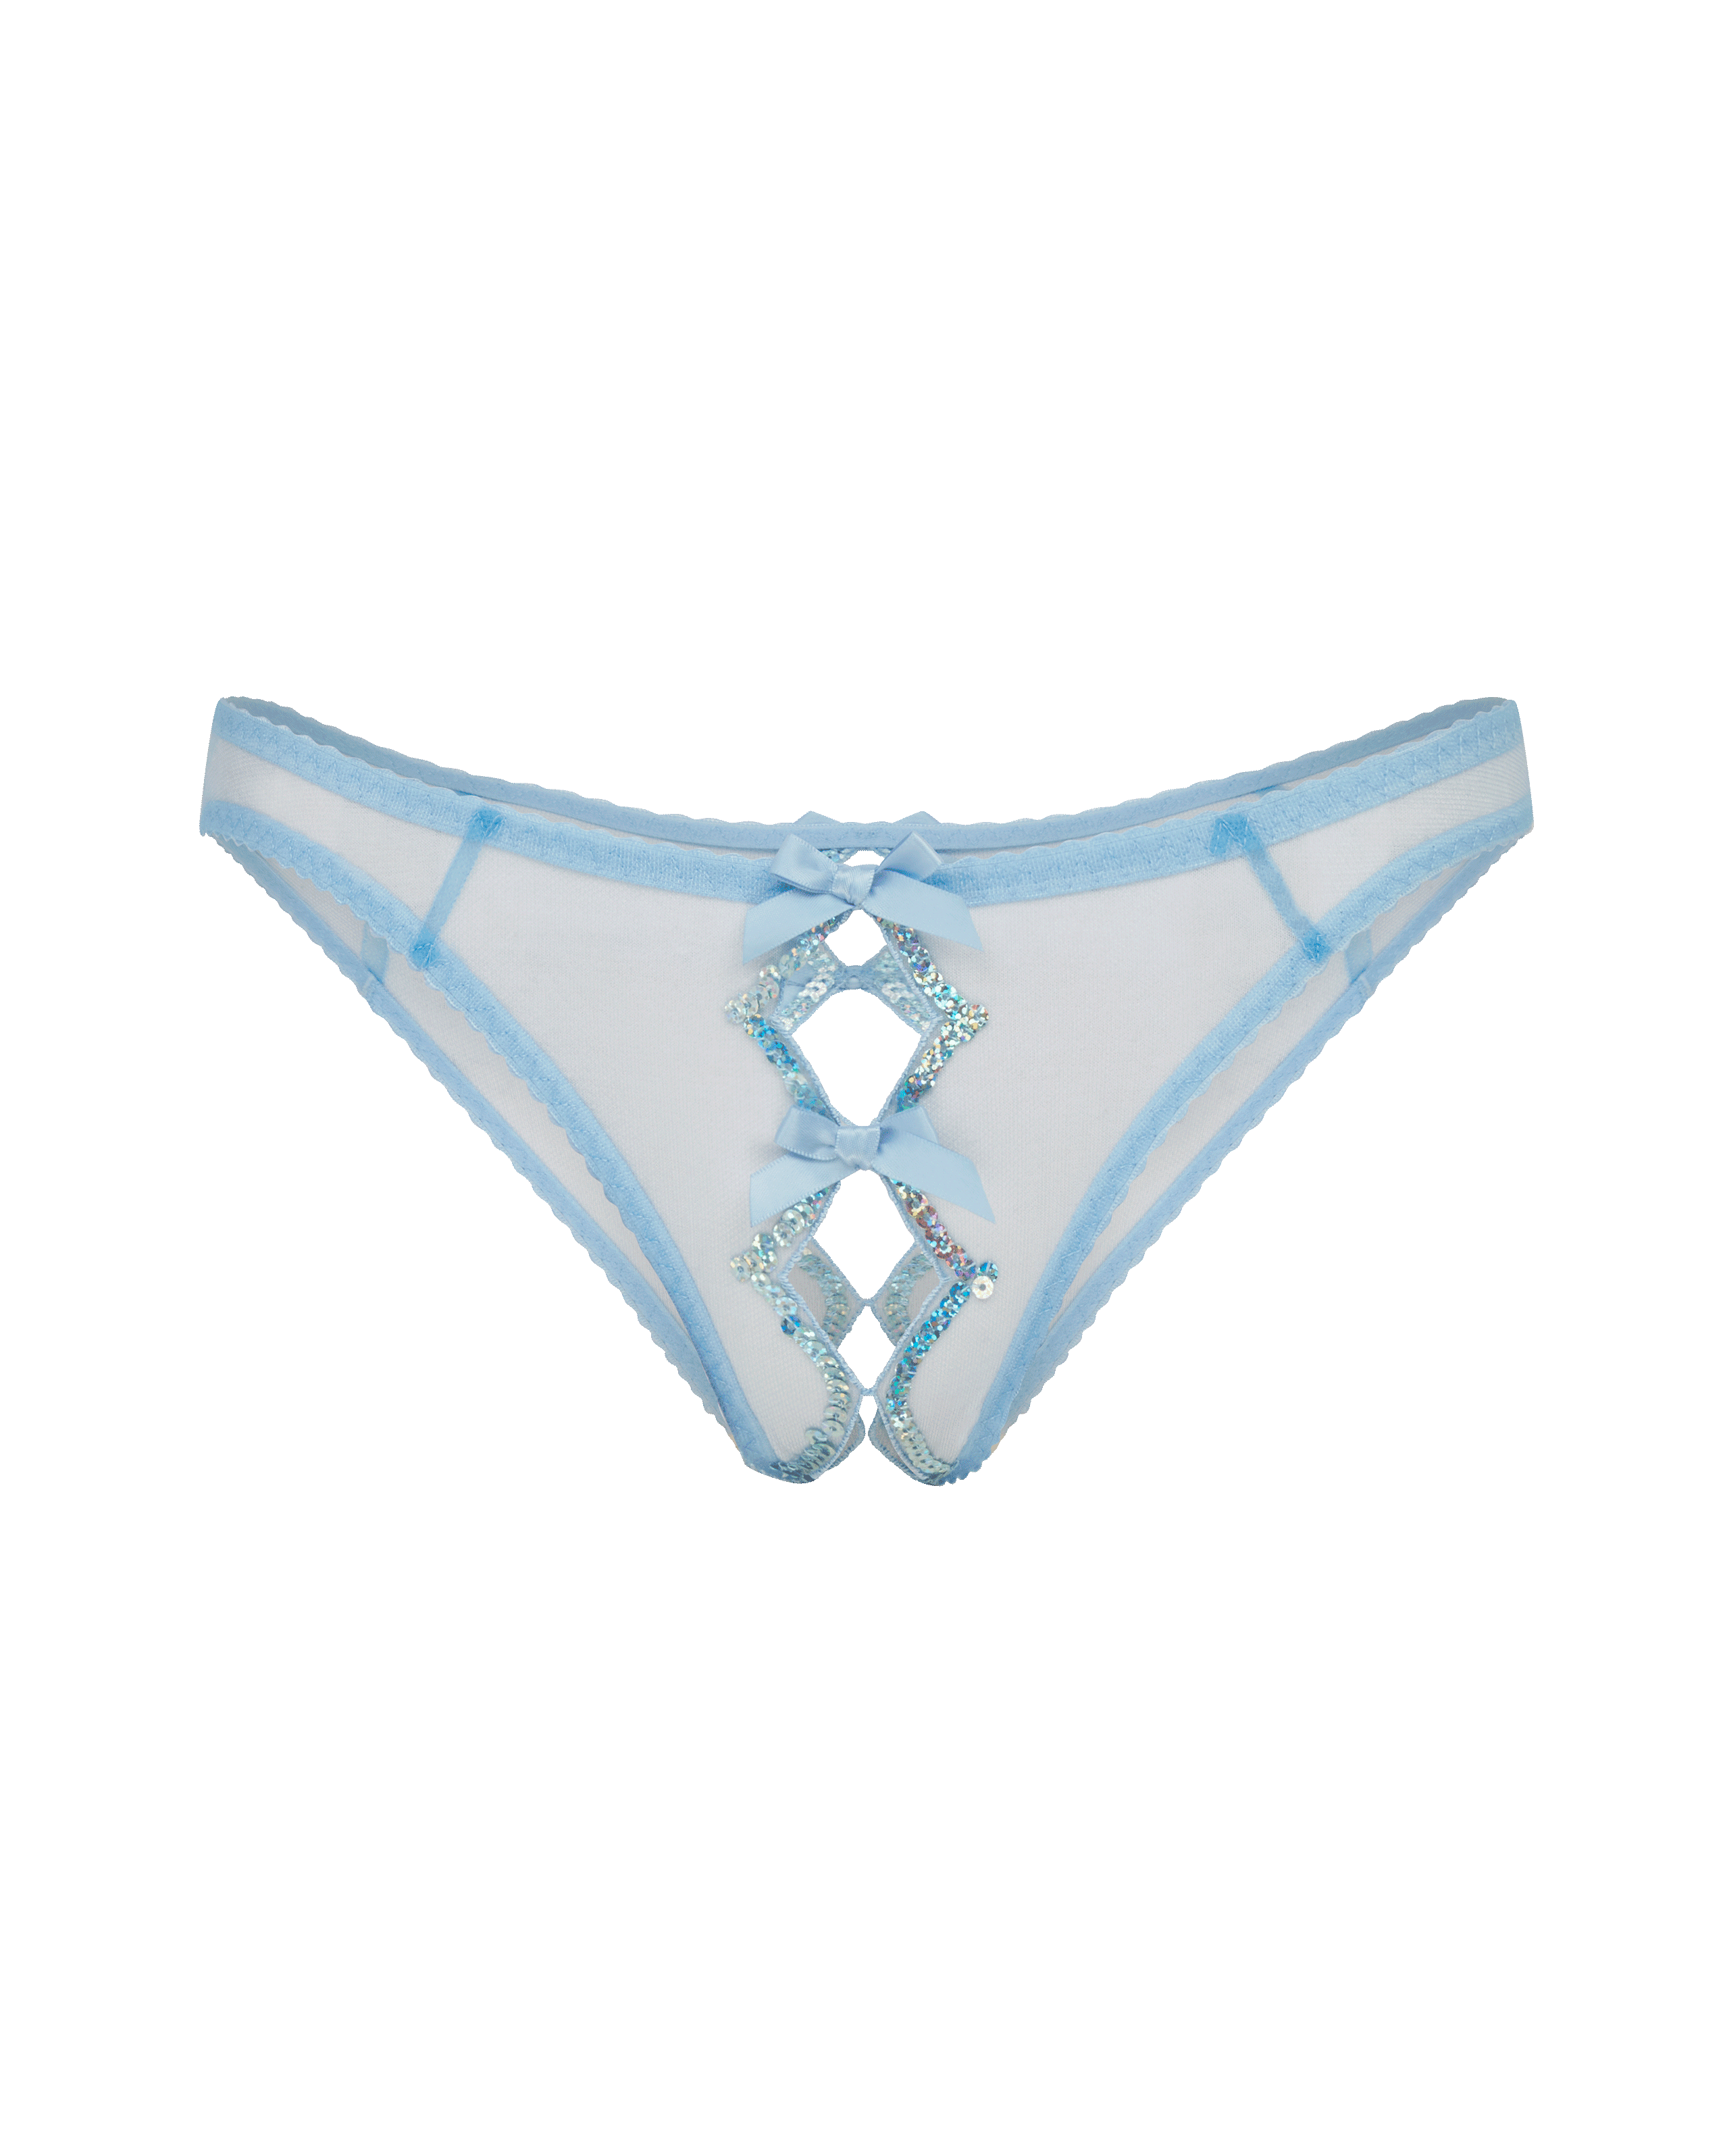 Lorna Party Ouvert in Baby Blue/Iridescent | By Agent Provocateur